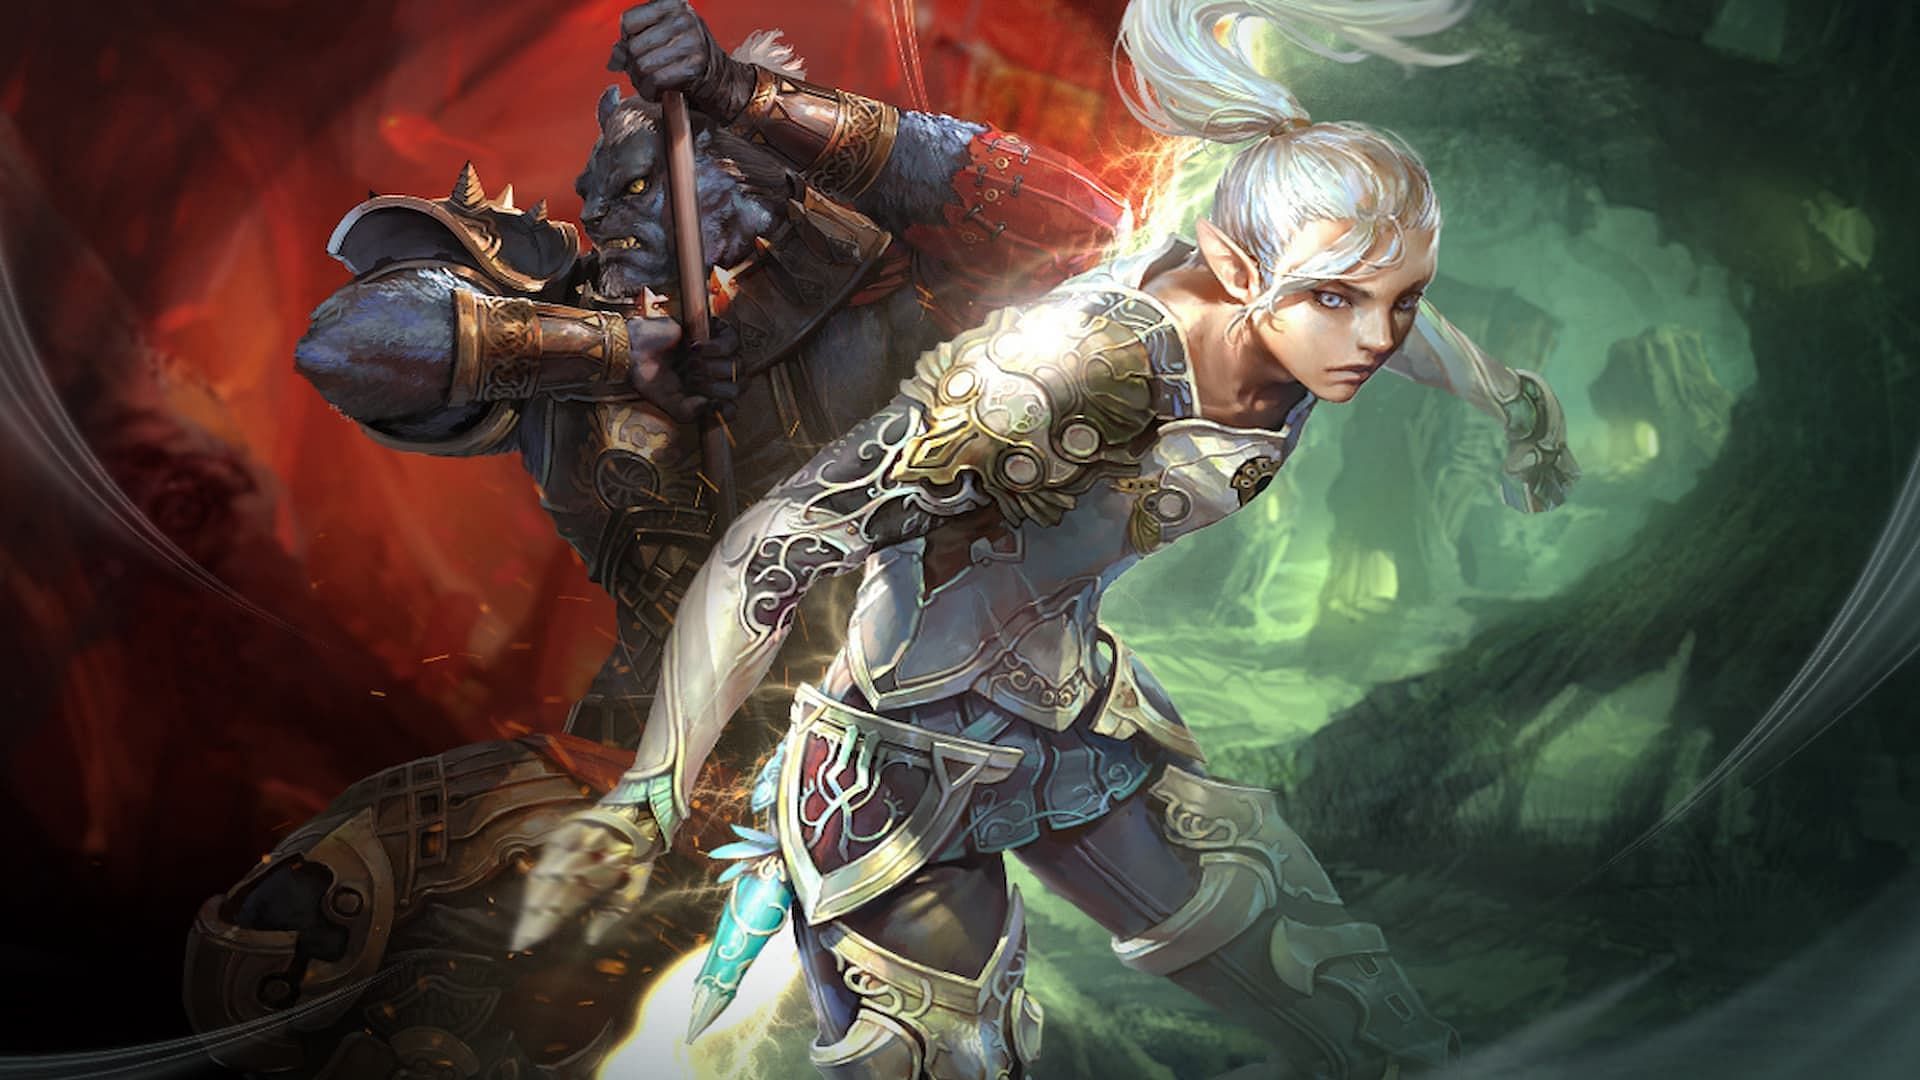 Different playable races posing in an ArcheAge artwork